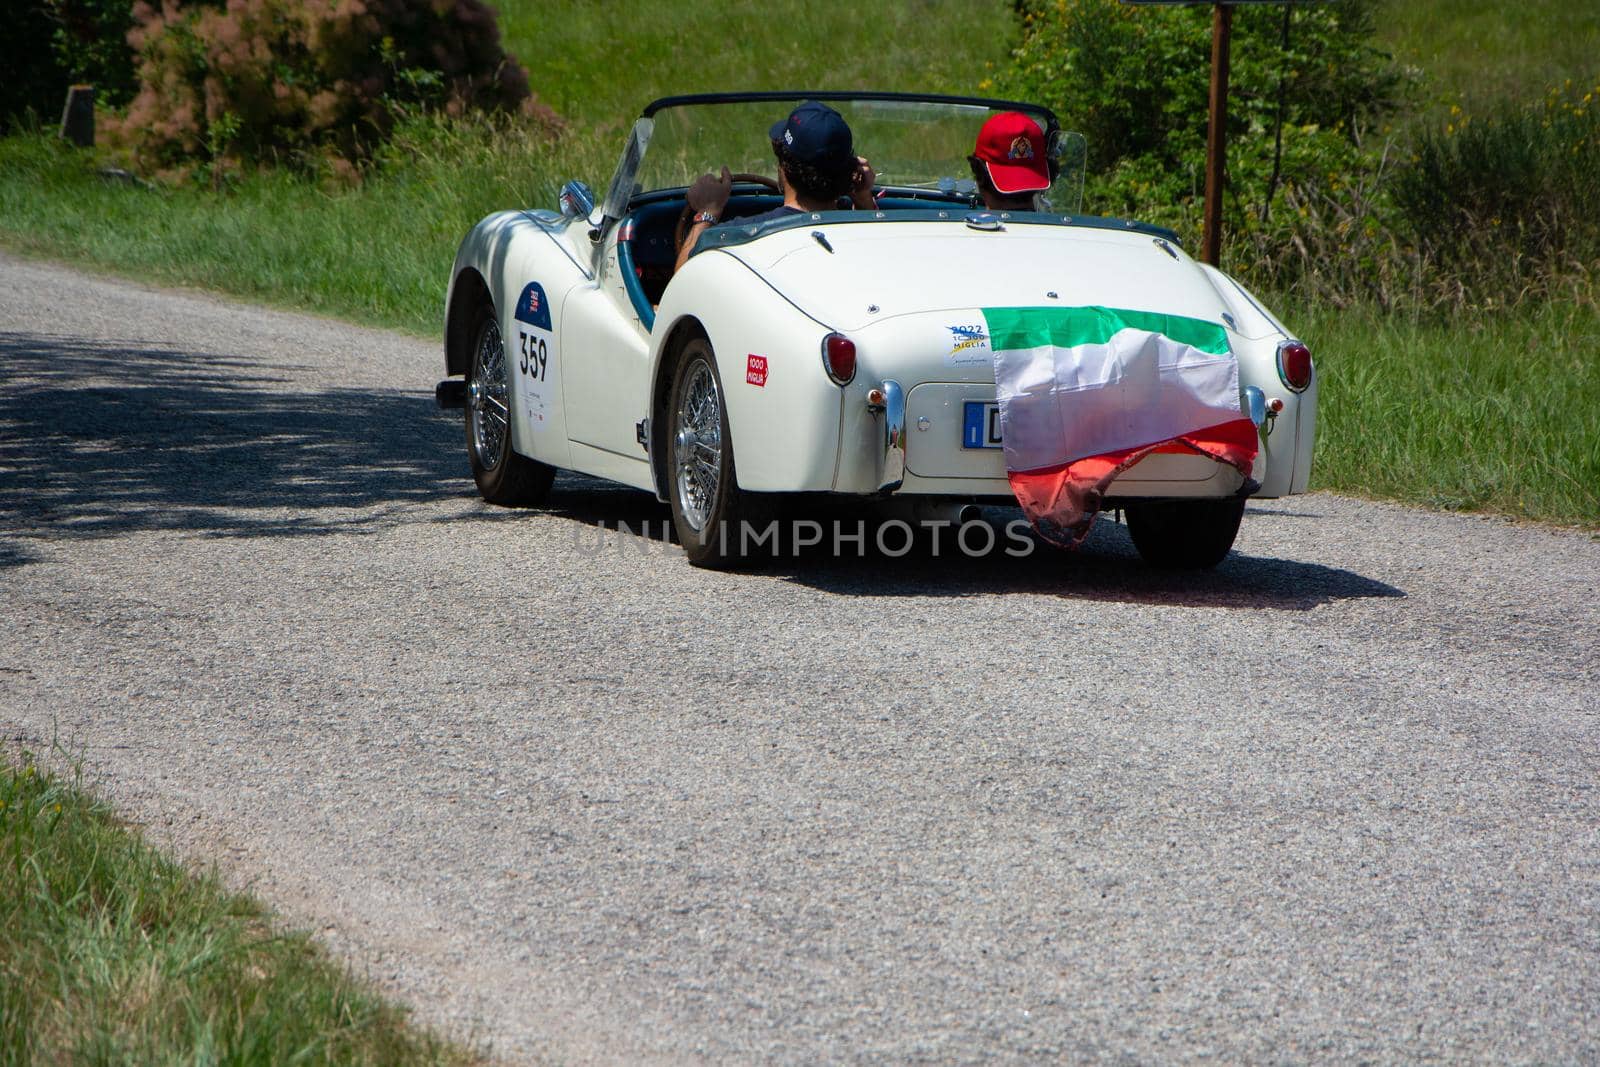 TRIUMPH TR3 SPORTS 1956 on an old racing car in rally Mille Miglia 2022 the famous italian historical race (1927-1957 by massimocampanari